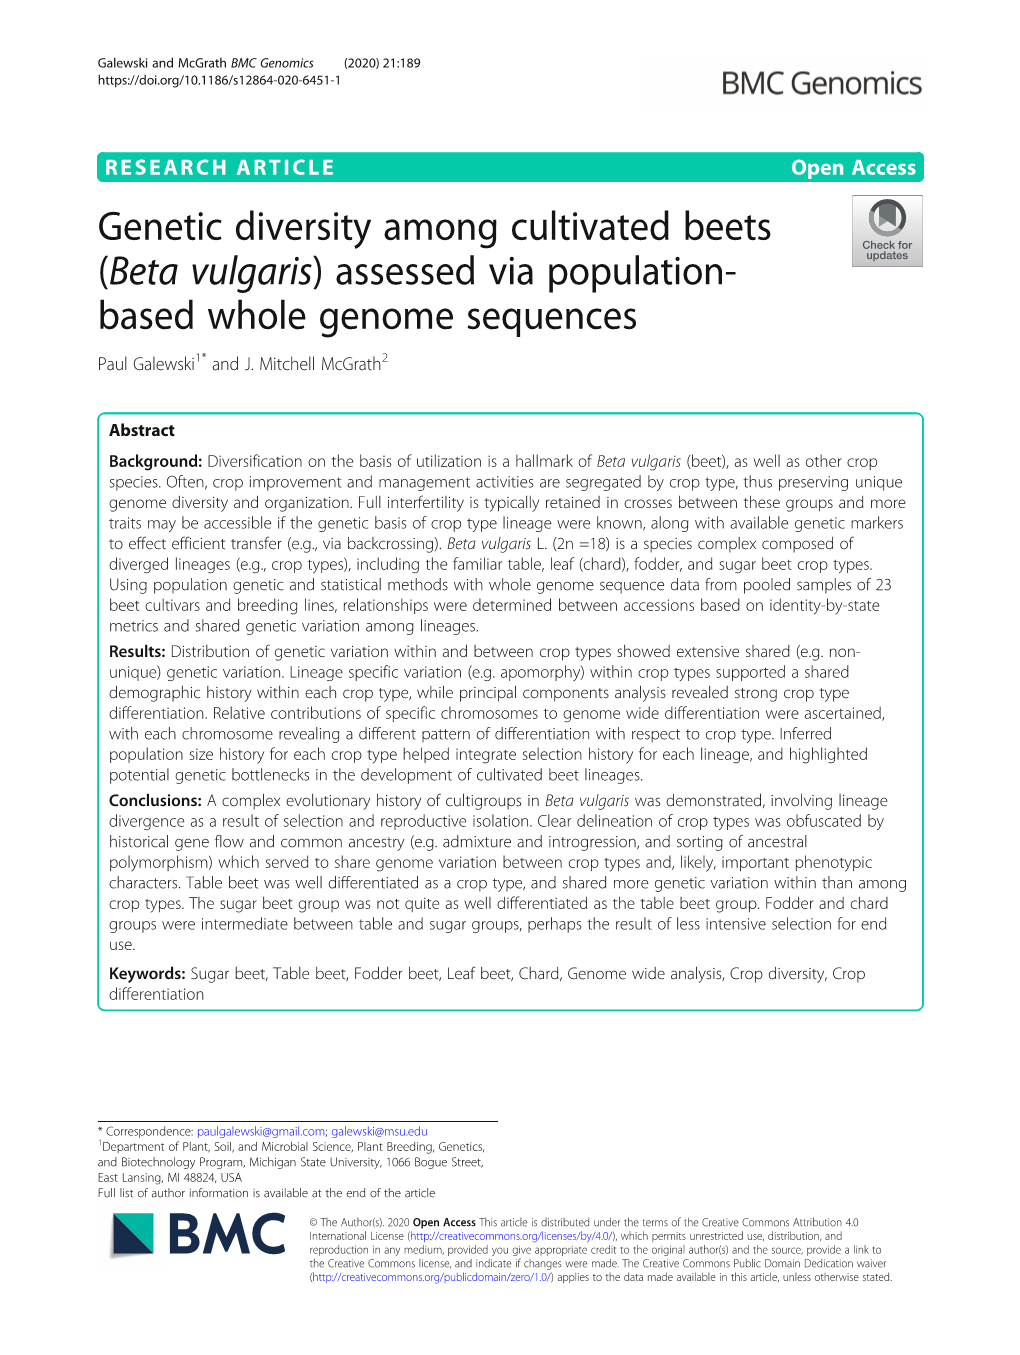 Genetic Diversity Among Cultivated Beets (Beta Vulgaris) Assessed Via Population- Based Whole Genome Sequences Paul Galewski1* and J